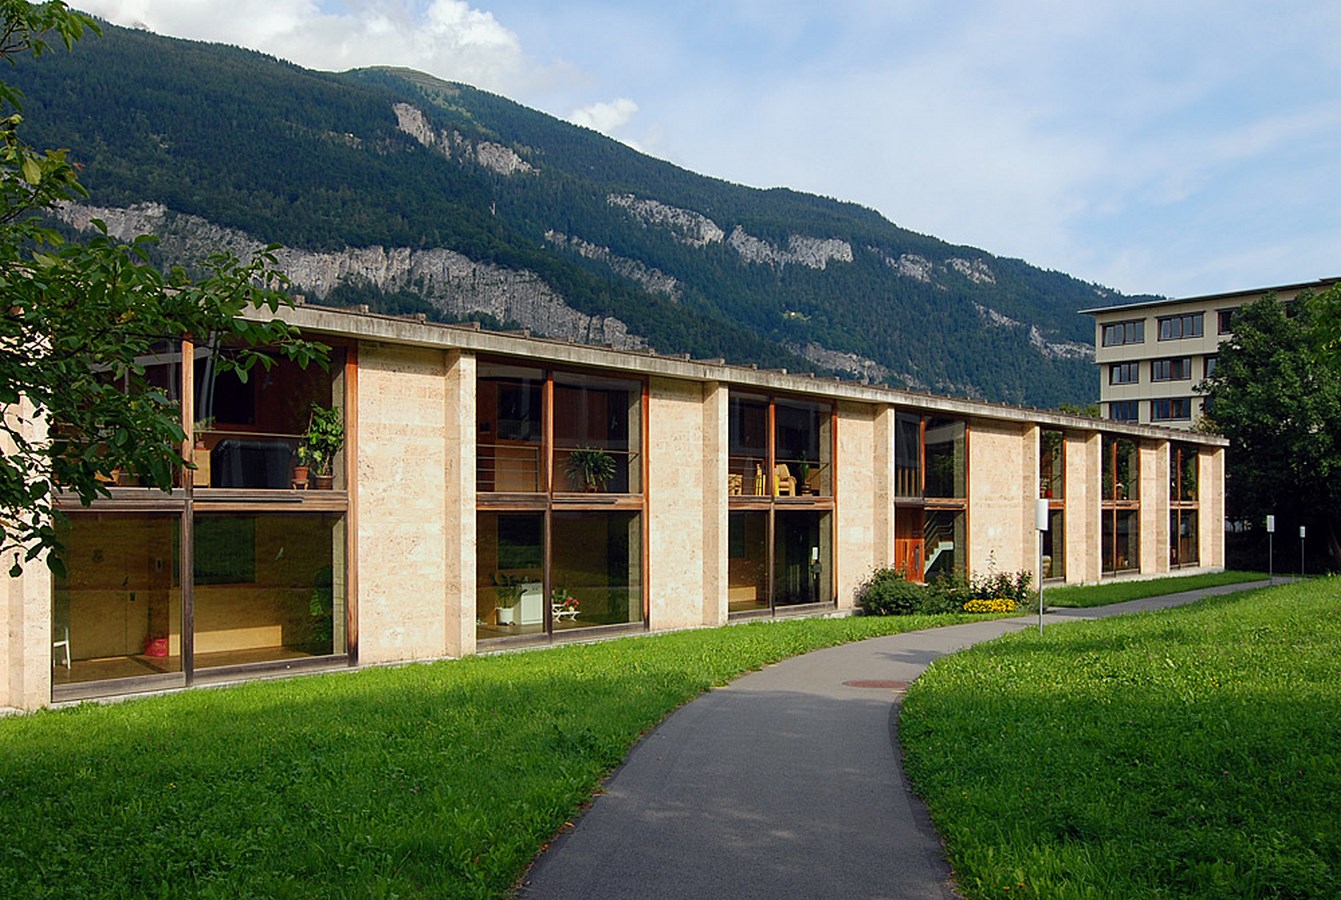 15 Works of Peter Zumthor Every Architect should visit - Residential Home for the Elderly, Masans